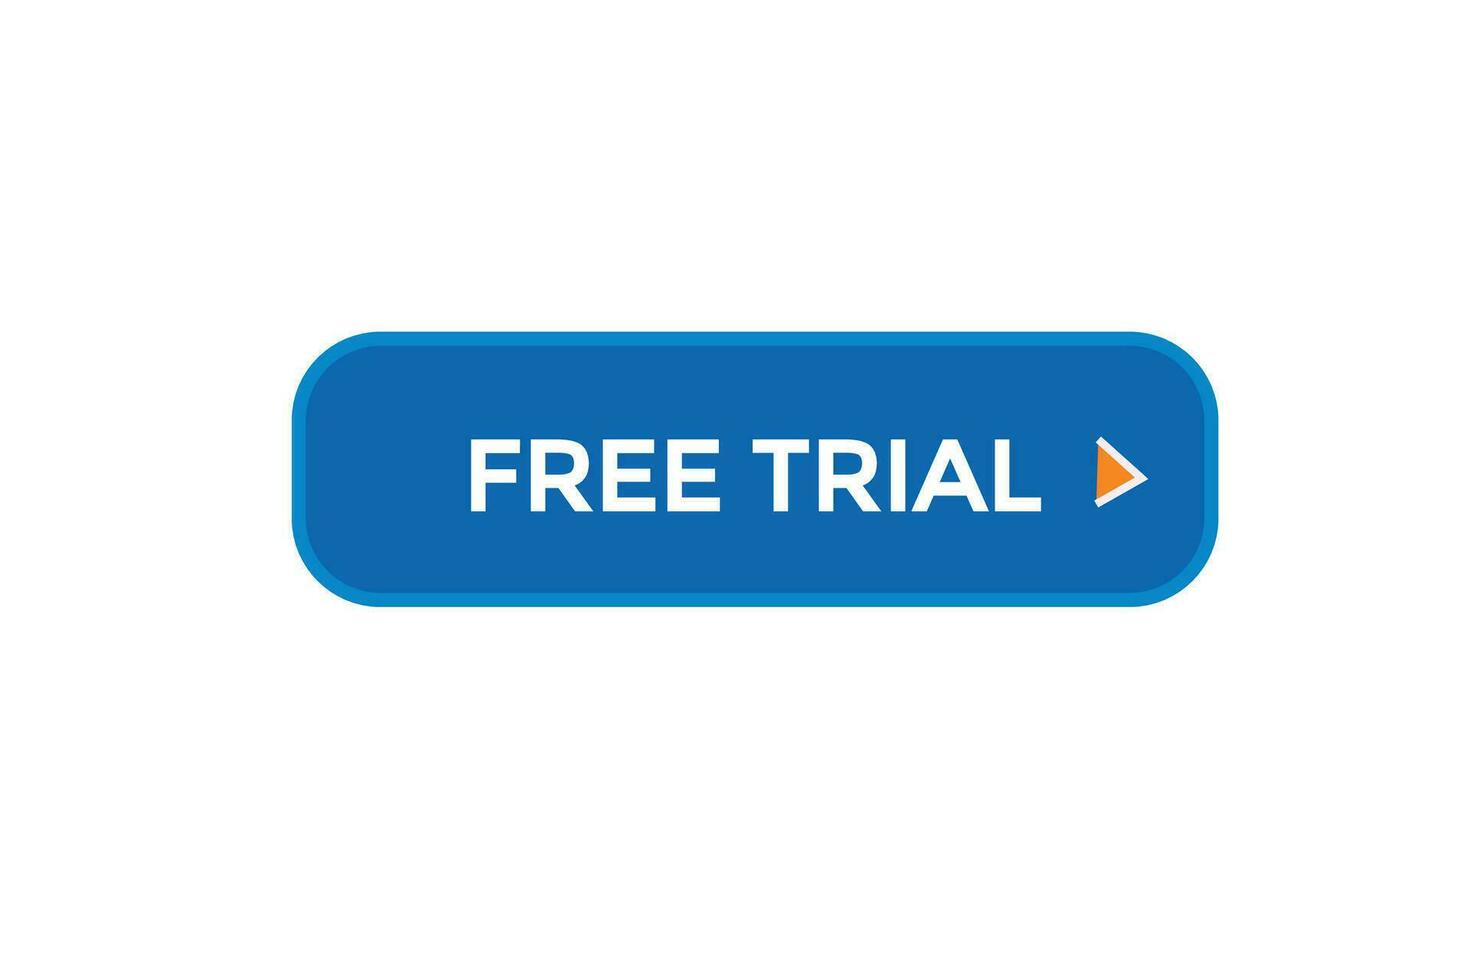 new free trial website, click button, level, sign, speech, bubble  banner, vector